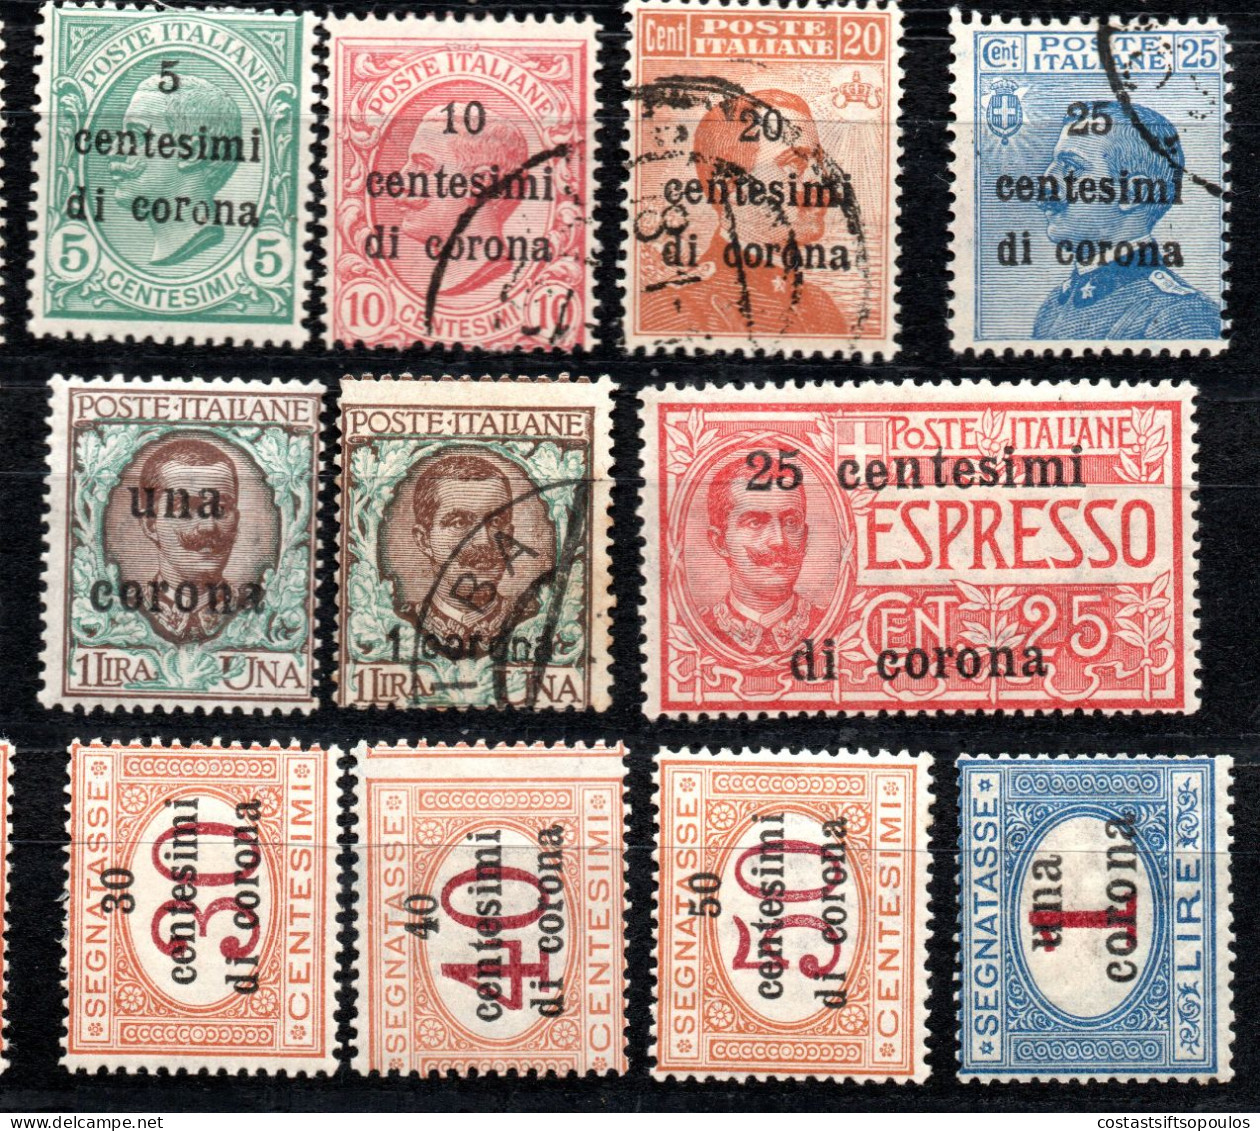 2145.AUSTRIA. ITALY. TRENTINO 1919-1920 41 ST. LOT.POSSIBLY SOME NOT GENUINE. GENERALLY GOOD CONDITION - Austrian Occupation